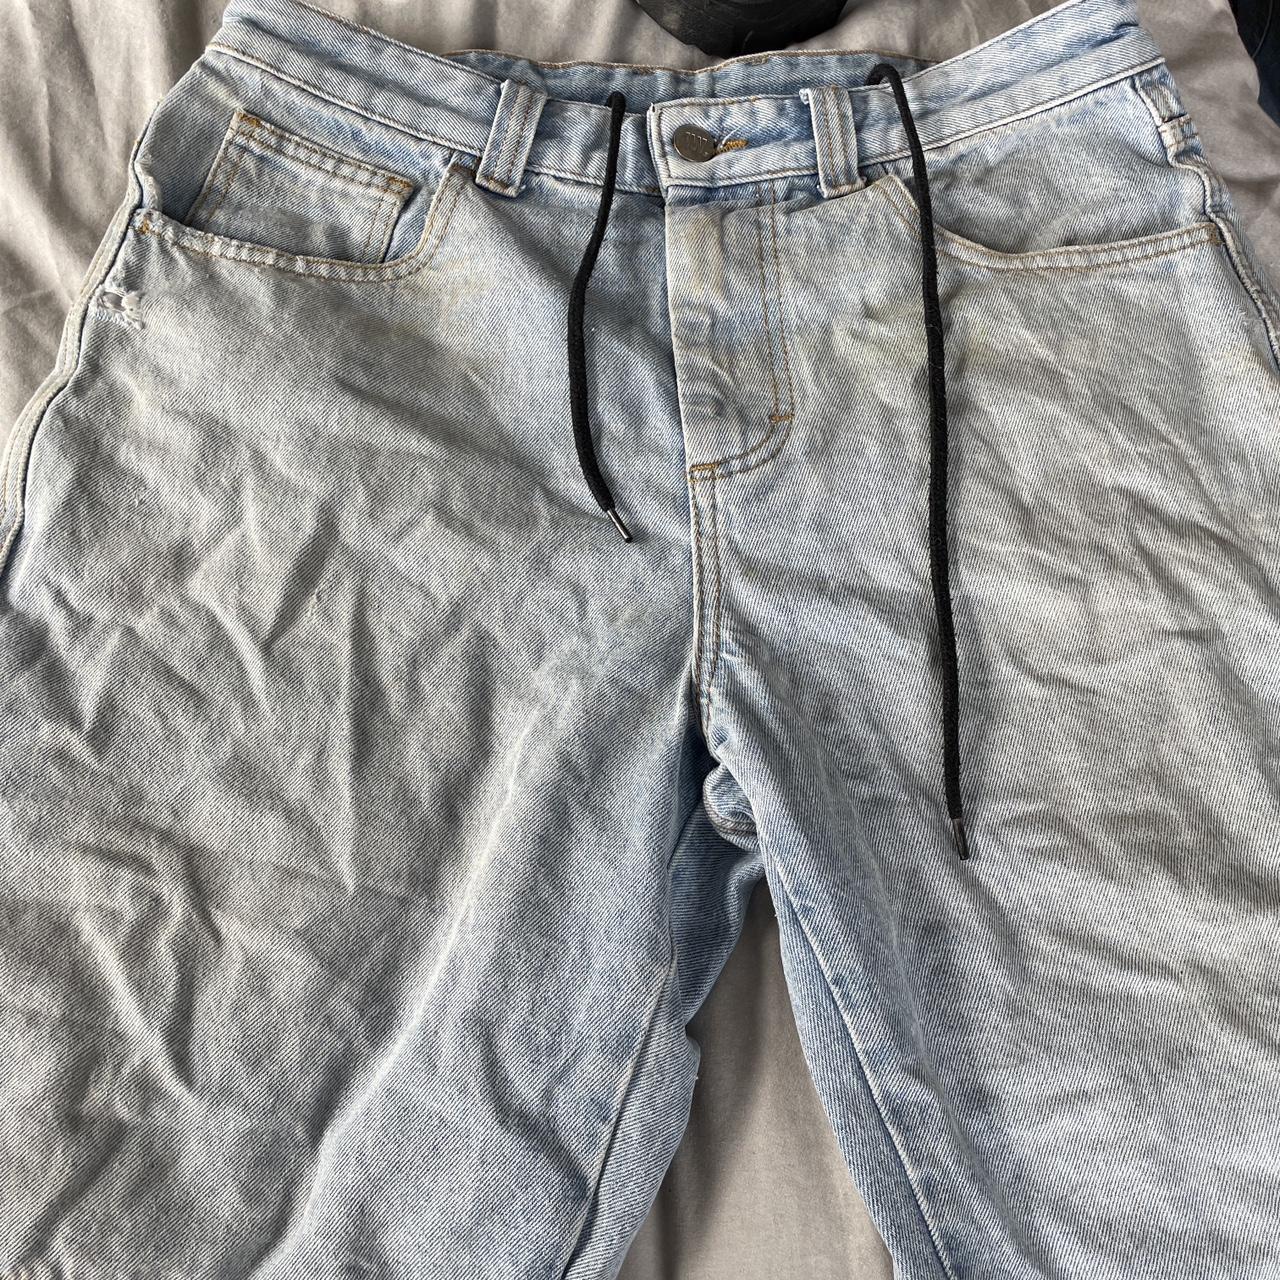 Size large baggy lower jorts, waist 32 with draw string - Depop